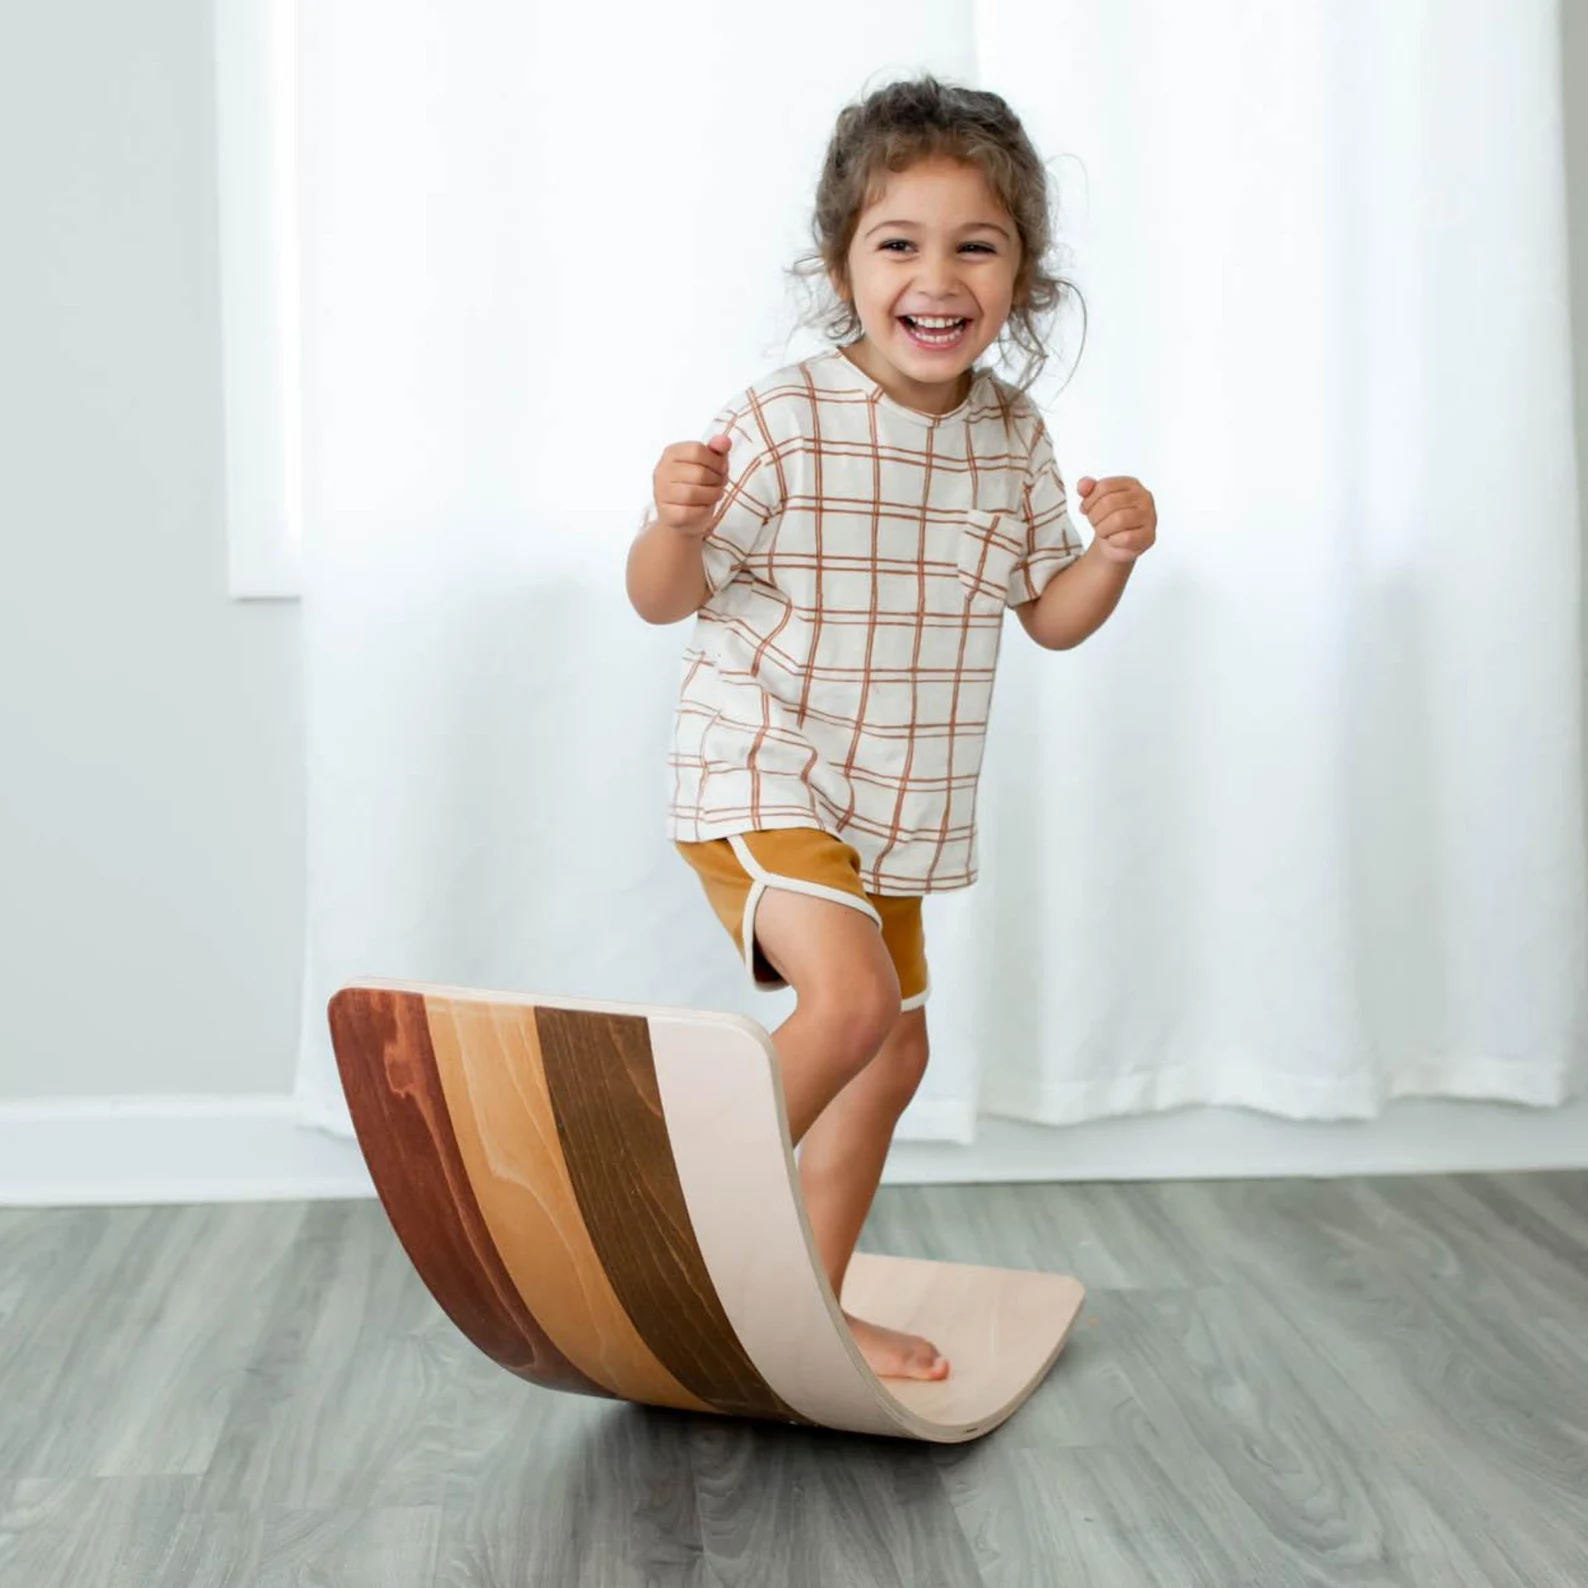 Image of young girl playing on a wobble board.